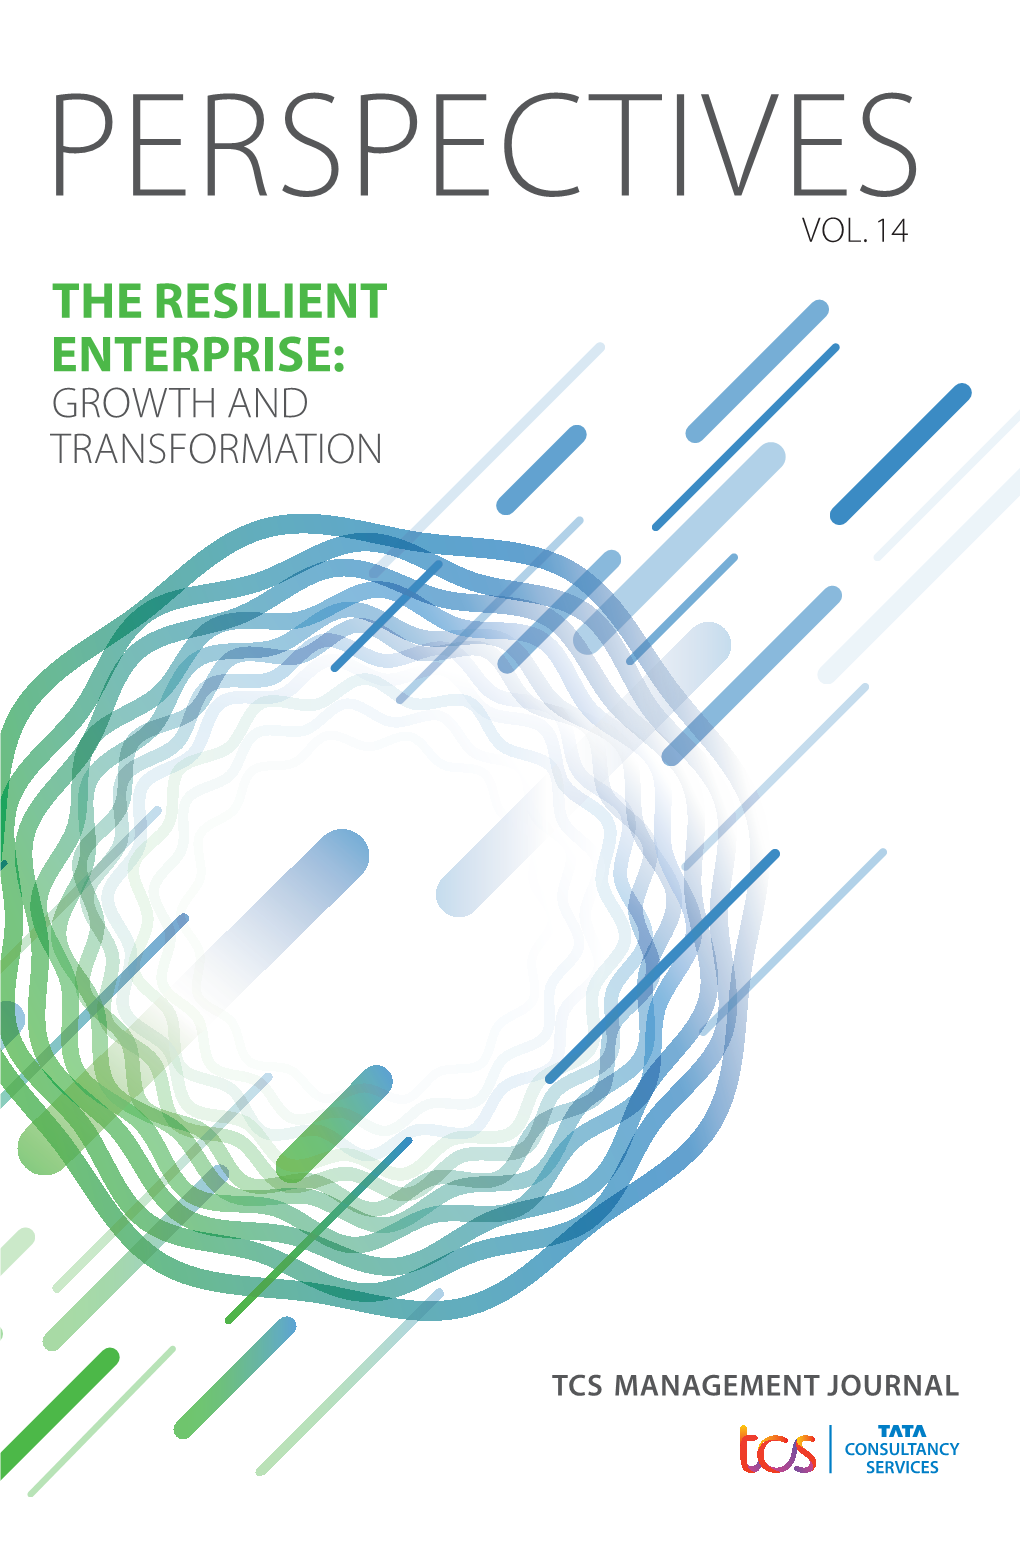 The Resilient Enterprise: Growth and Transformation